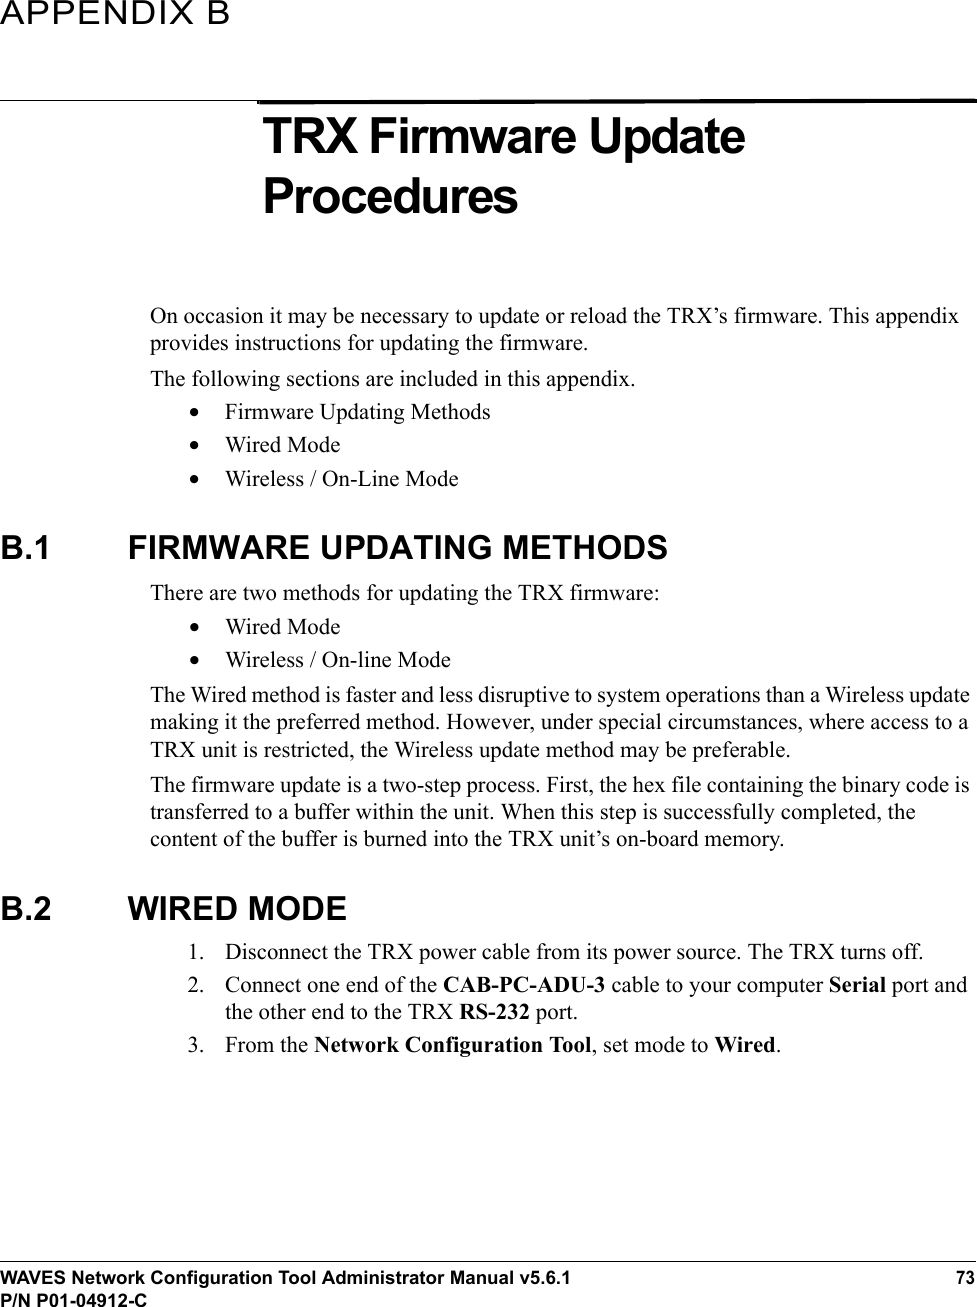 WAVES Network Configuration Tool Administrator Manual v5.6.173P/N P01-04912-CAPPENDIX BTRX Firmware Update ProceduresOn occasion it may be necessary to update or reload the TRX’s firmware. This appendix provides instructions for updating the firmware.The following sections are included in this appendix.•Firmware Updating Methods•Wired Mode•Wireless / On-Line ModeB.1 FIRMWARE UPDATING METHODSThere are two methods for updating the TRX firmware:•Wired Mode•Wireless / On-line ModeThe Wired method is faster and less disruptive to system operations than a Wireless update making it the preferred method. However, under special circumstances, where access to a TRX unit is restricted, the Wireless update method may be preferable. The firmware update is a two-step process. First, the hex file containing the binary code is transferred to a buffer within the unit. When this step is successfully completed, the content of the buffer is burned into the TRX unit’s on-board memory. B.2 WIRED MODE1. Disconnect the TRX power cable from its power source. The TRX turns off.2. Connect one end of the CAB-PC-ADU-3 cable to your computer Serial port and the other end to the TRX RS-232 port.3. From the Network Configuration Tool, set mode to Wired.